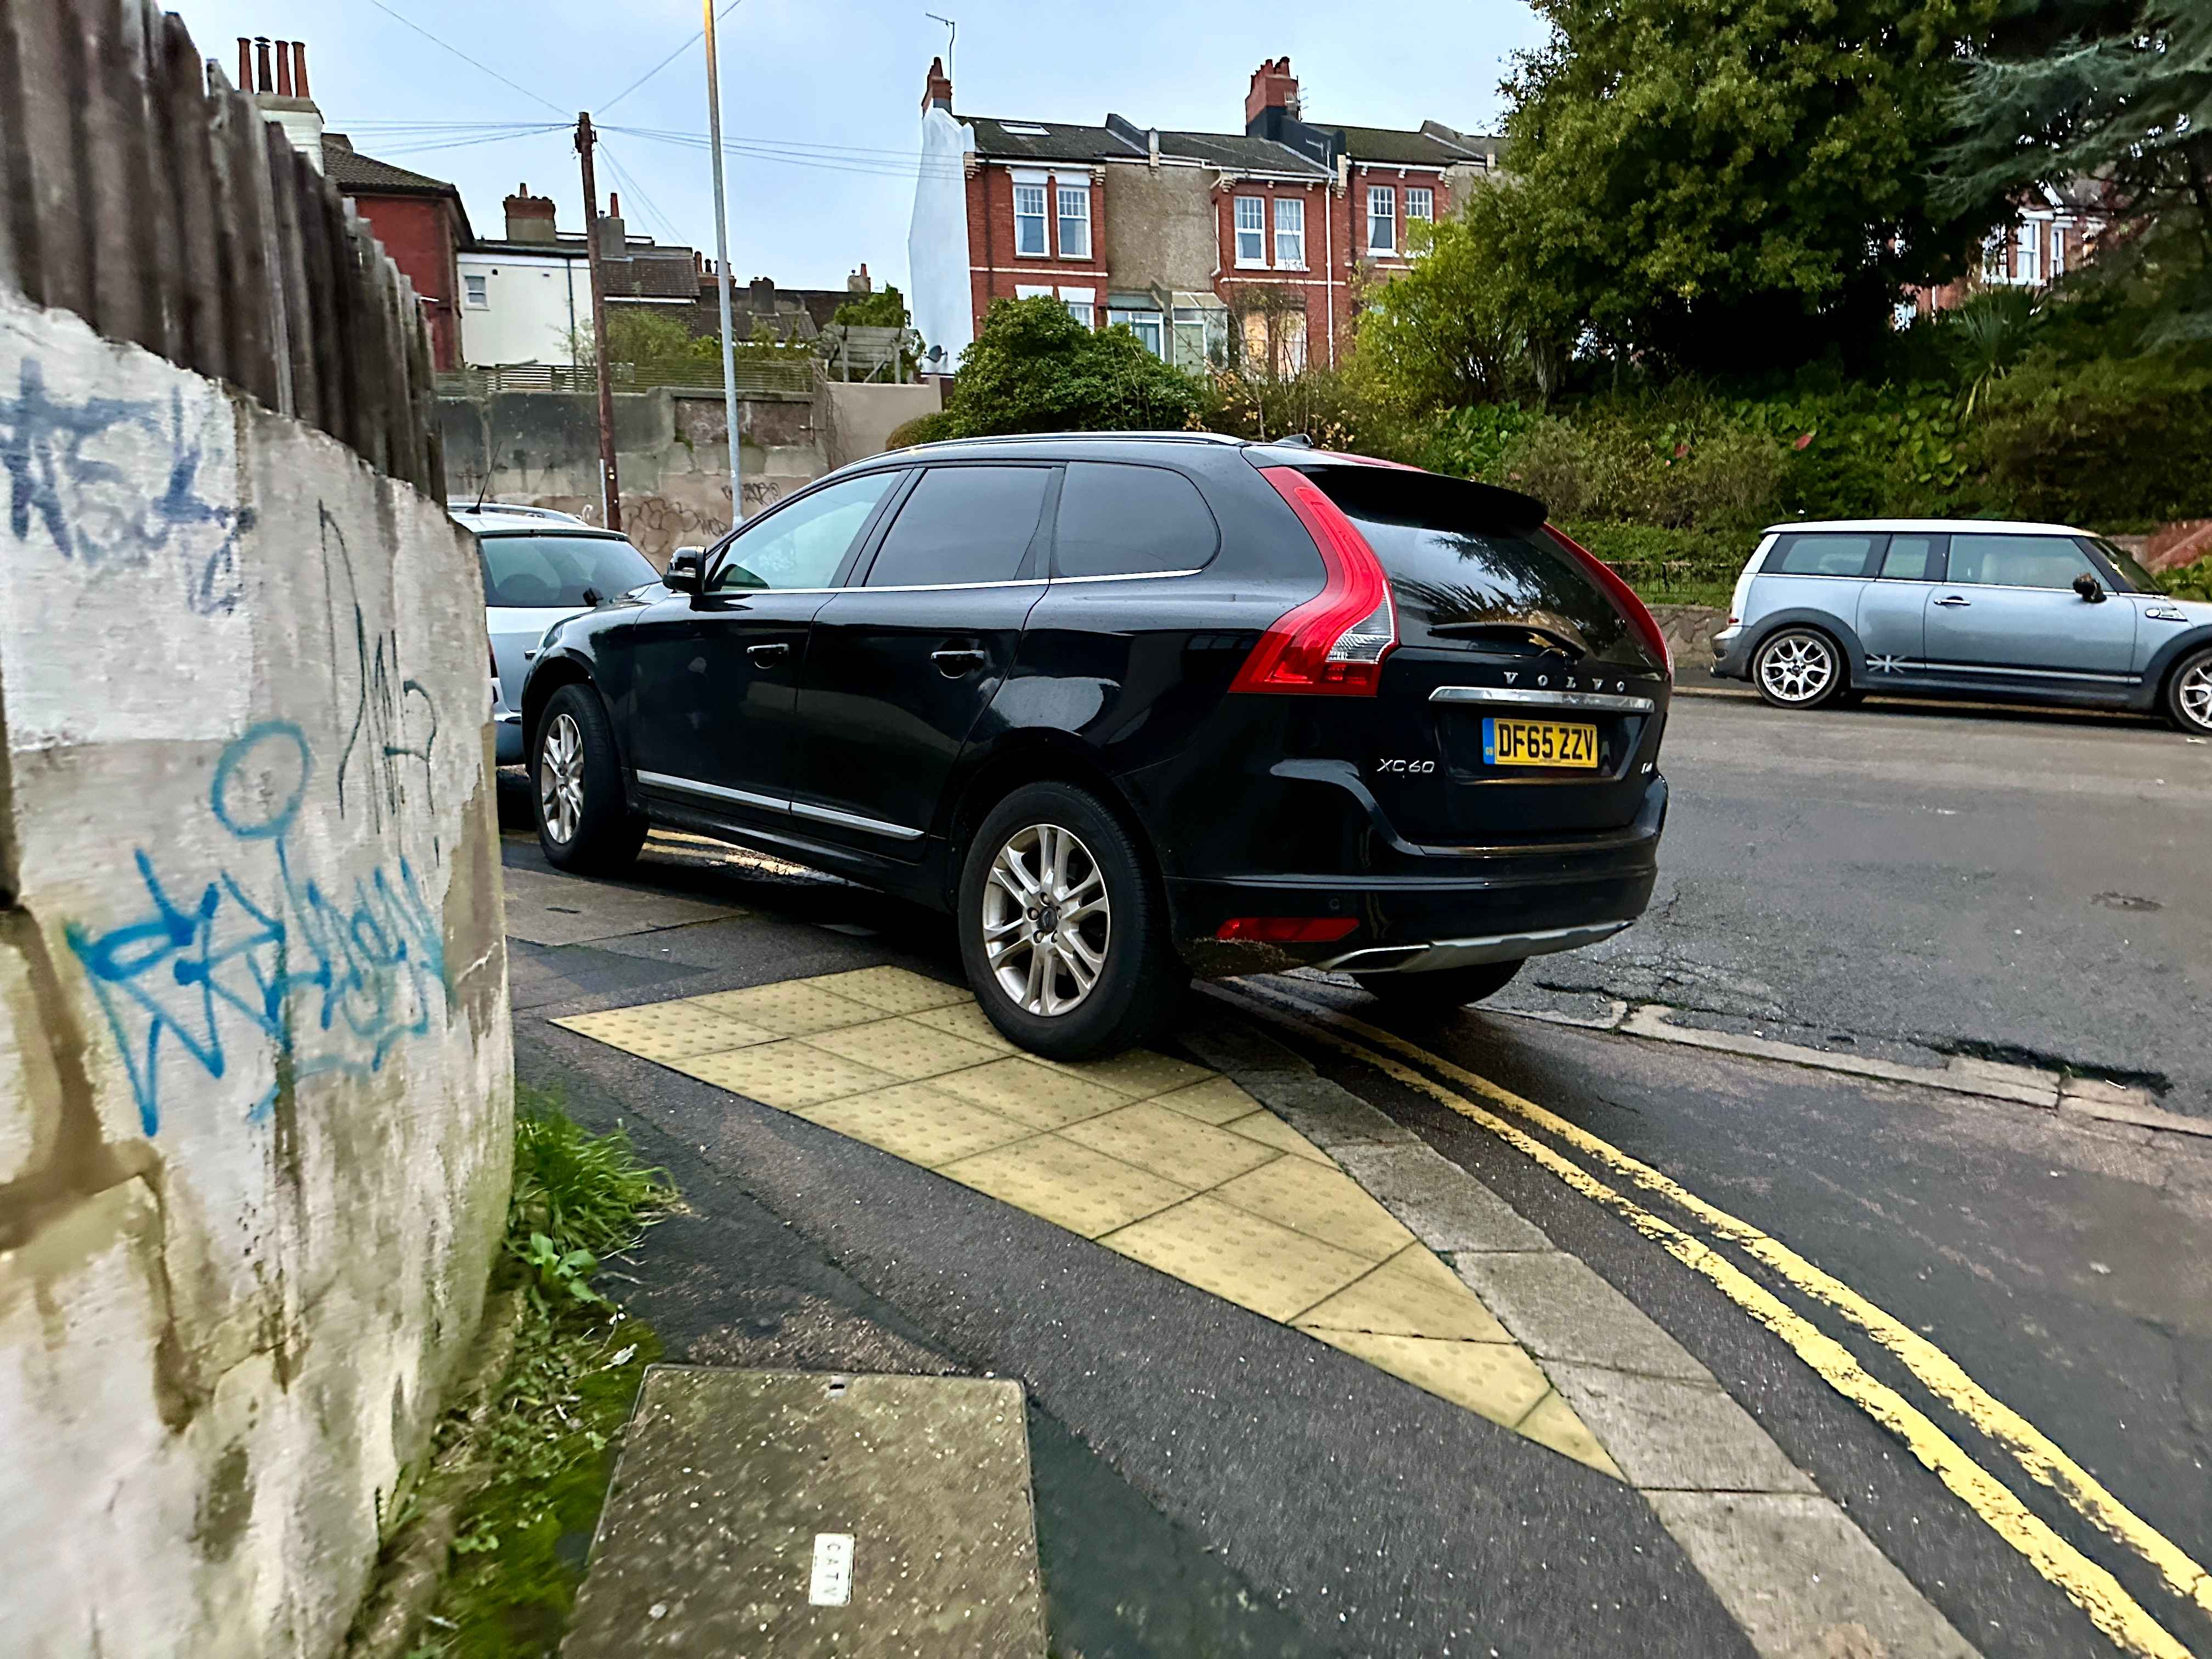 Photograph of DF65 ZZV - a Black Volvo XC60 parked in Hollingdean by a non-resident. The eighth of eight photographs supplied by the residents of Hollingdean.